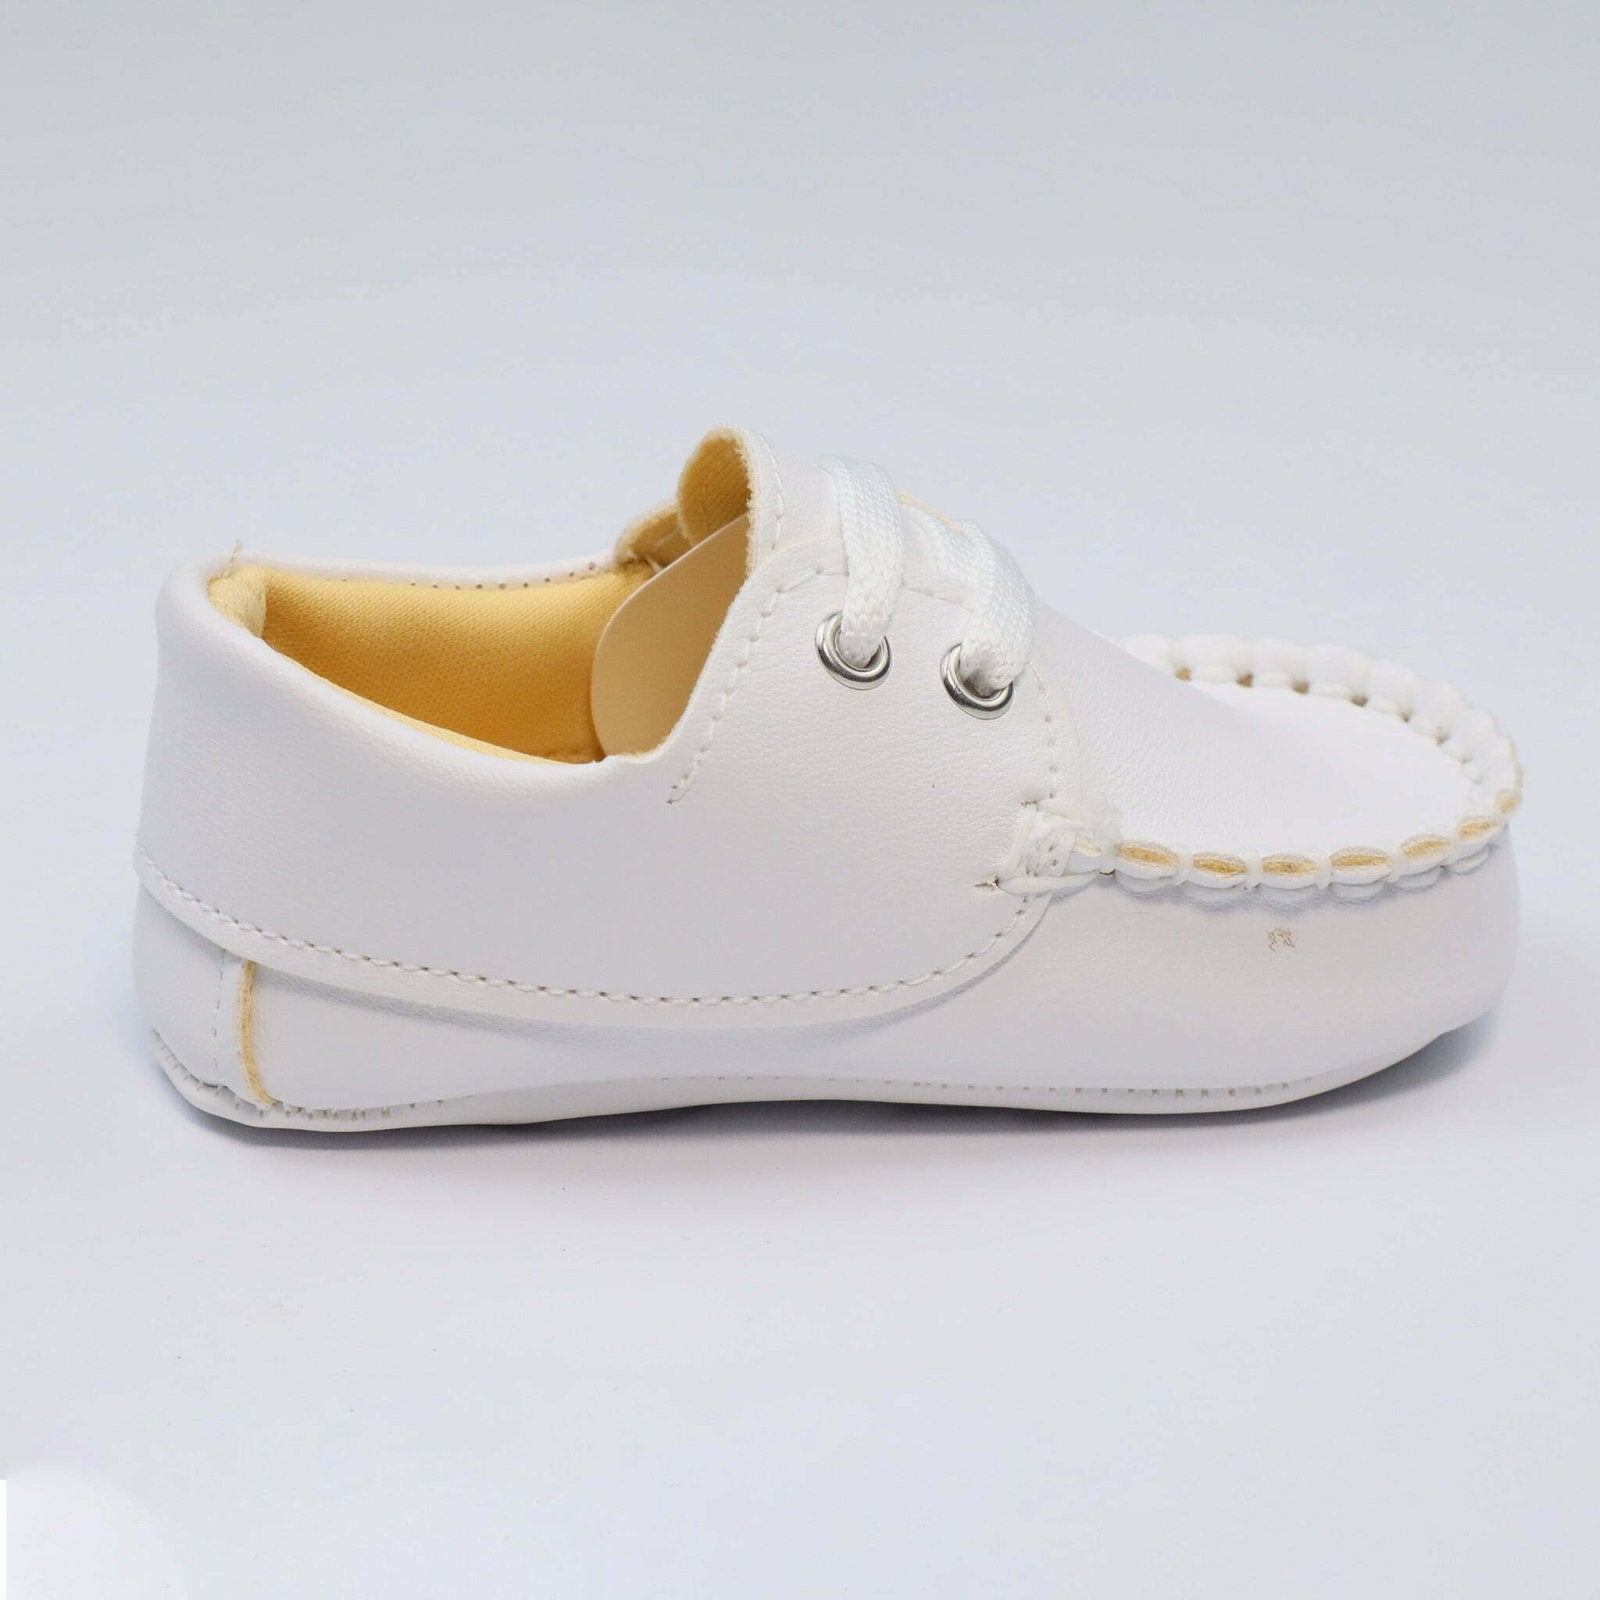 Baby Shoes Casual White With Laces by Baby Pattini